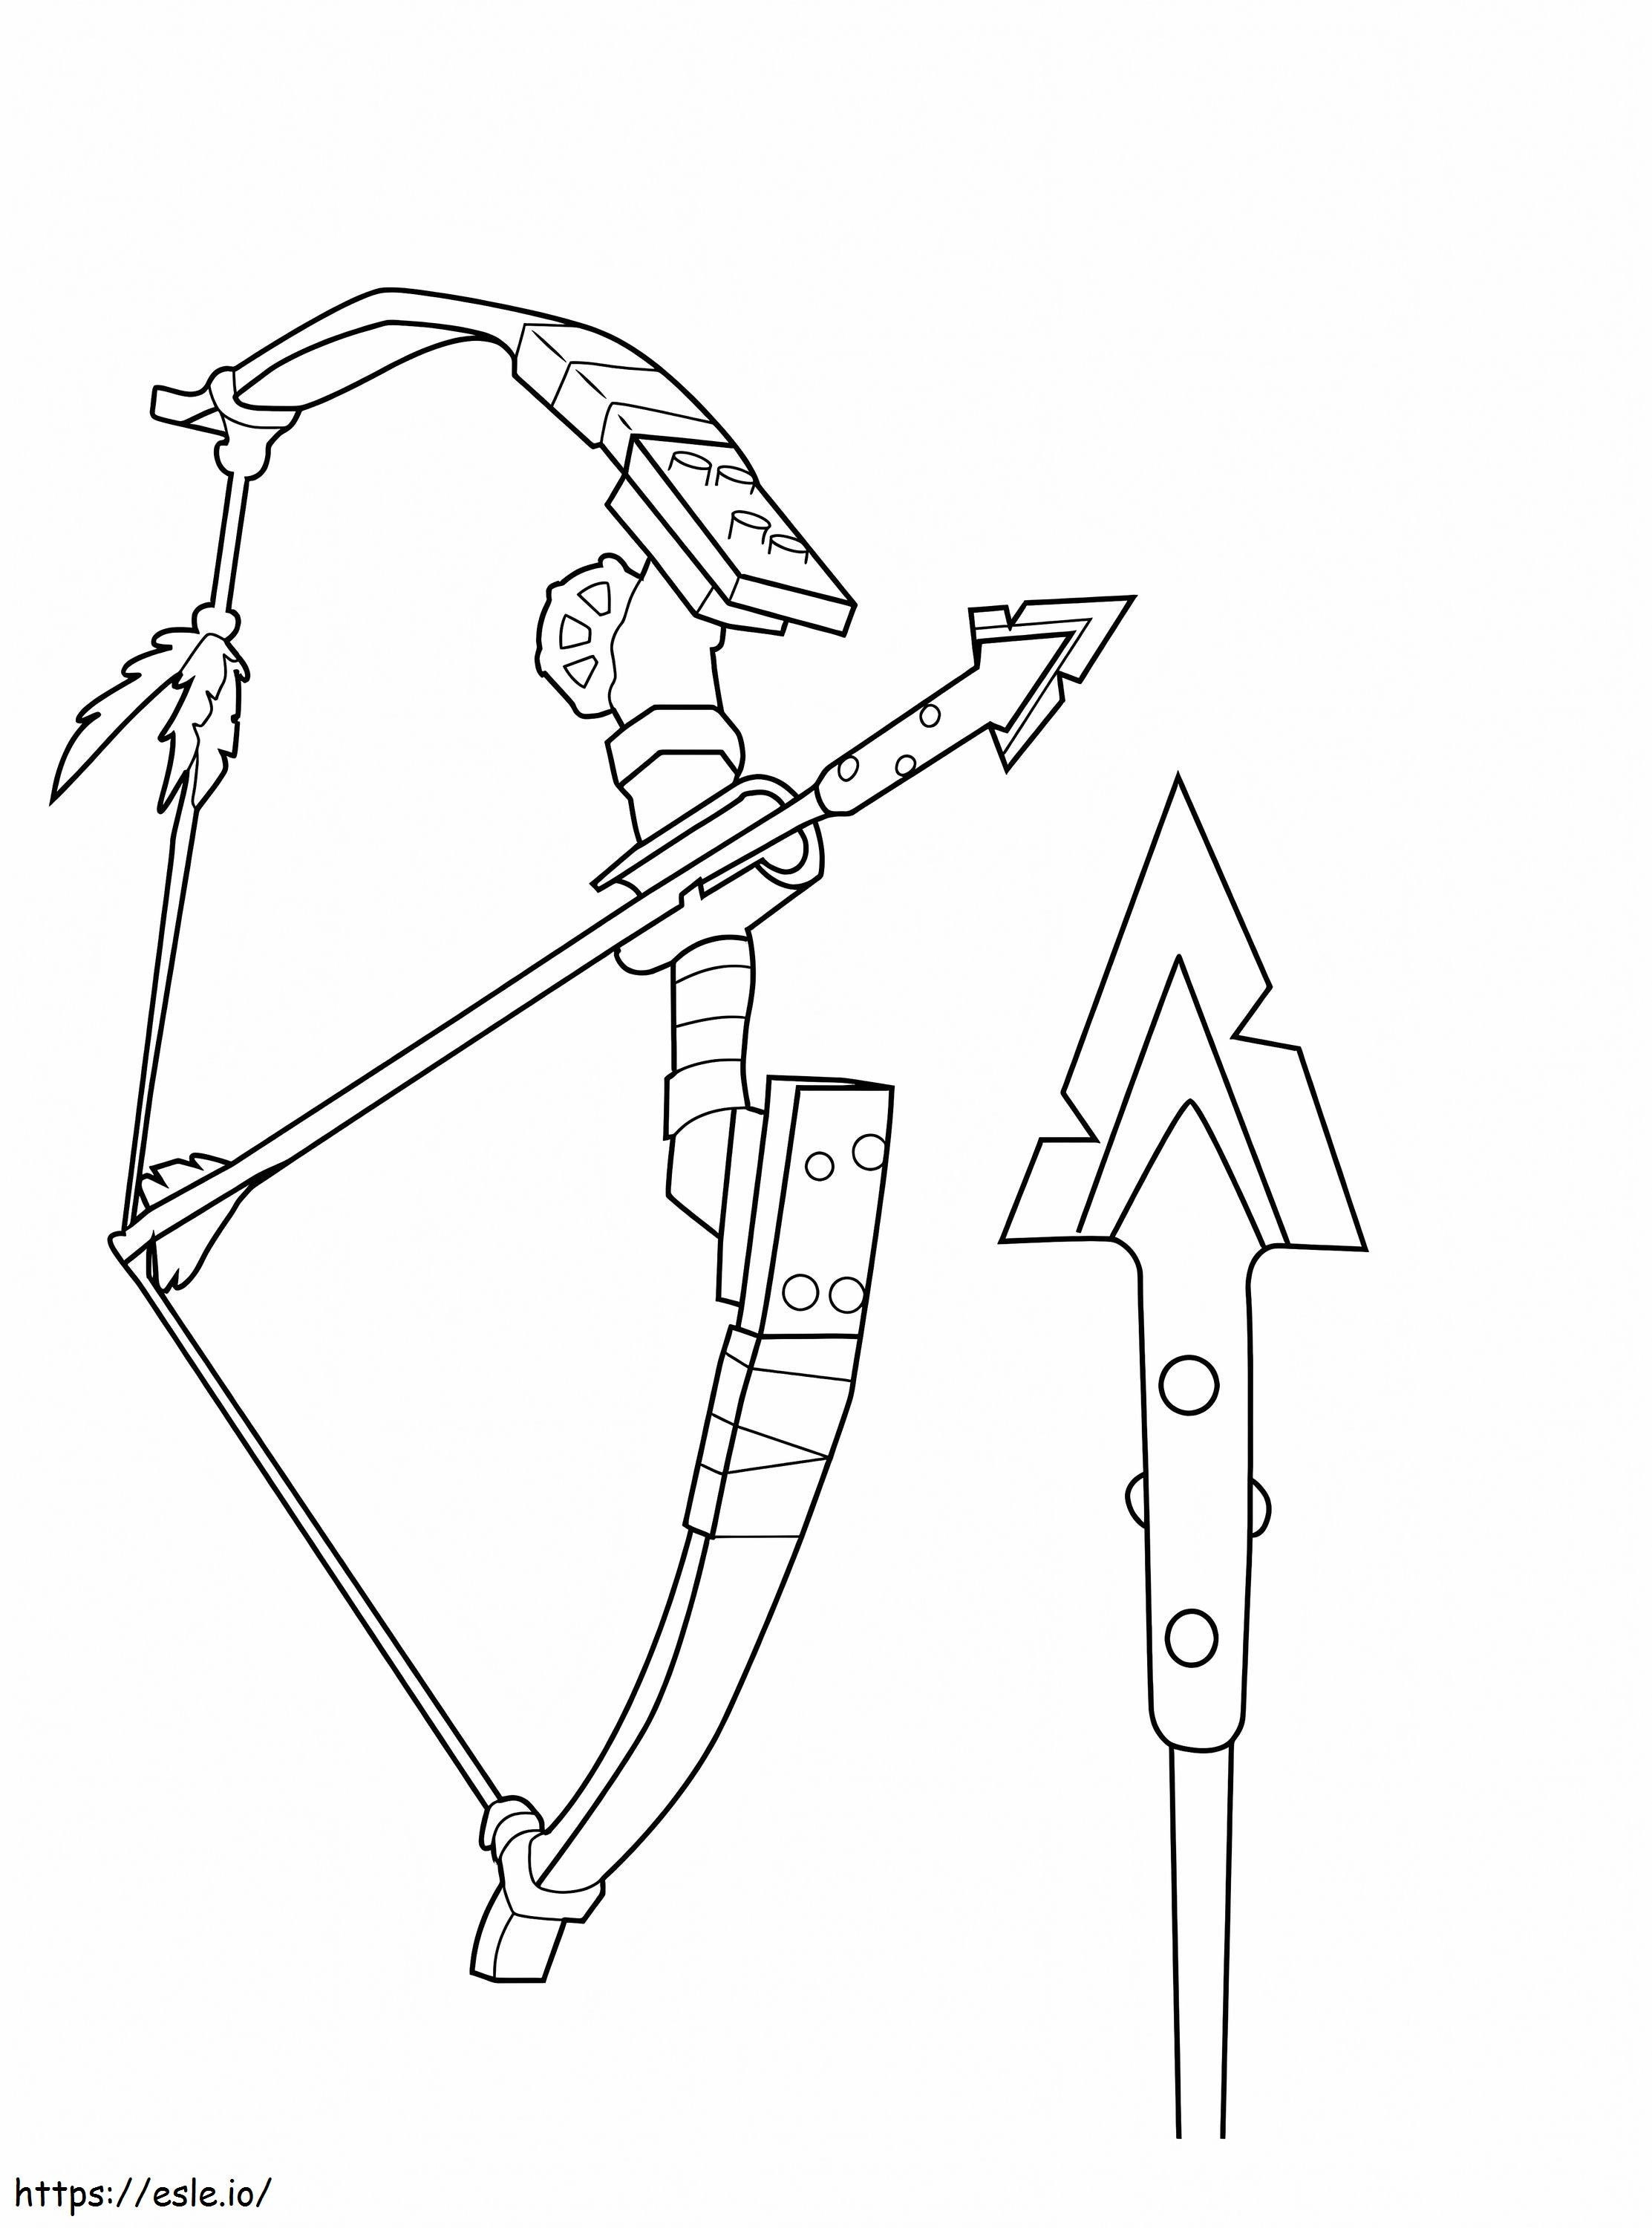 Fortnite Makeshift Bow coloring page